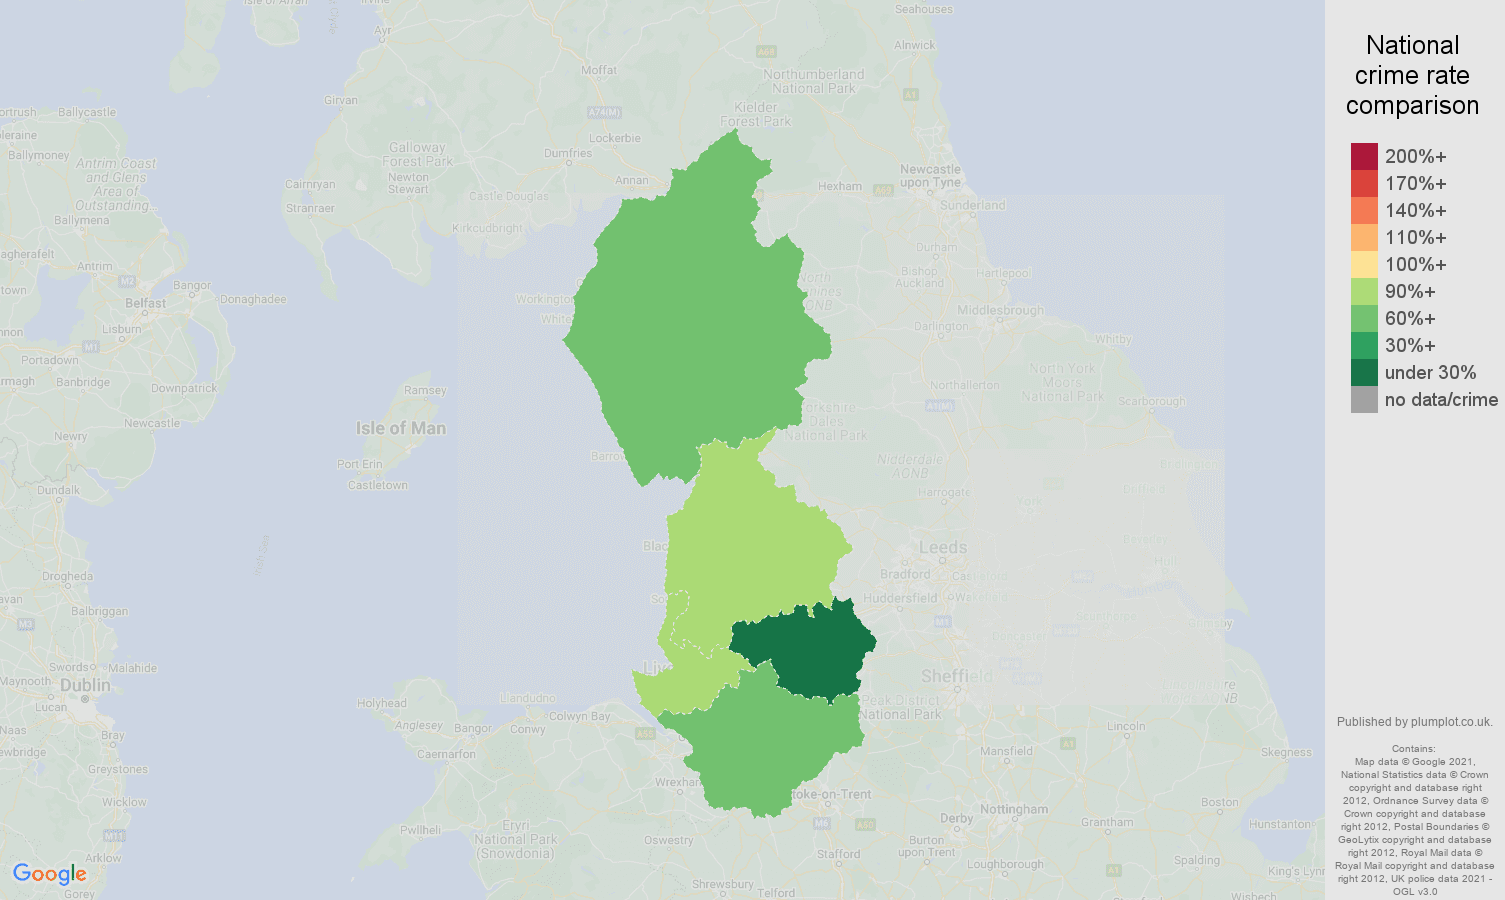 North West shoplifting crime rate comparison map